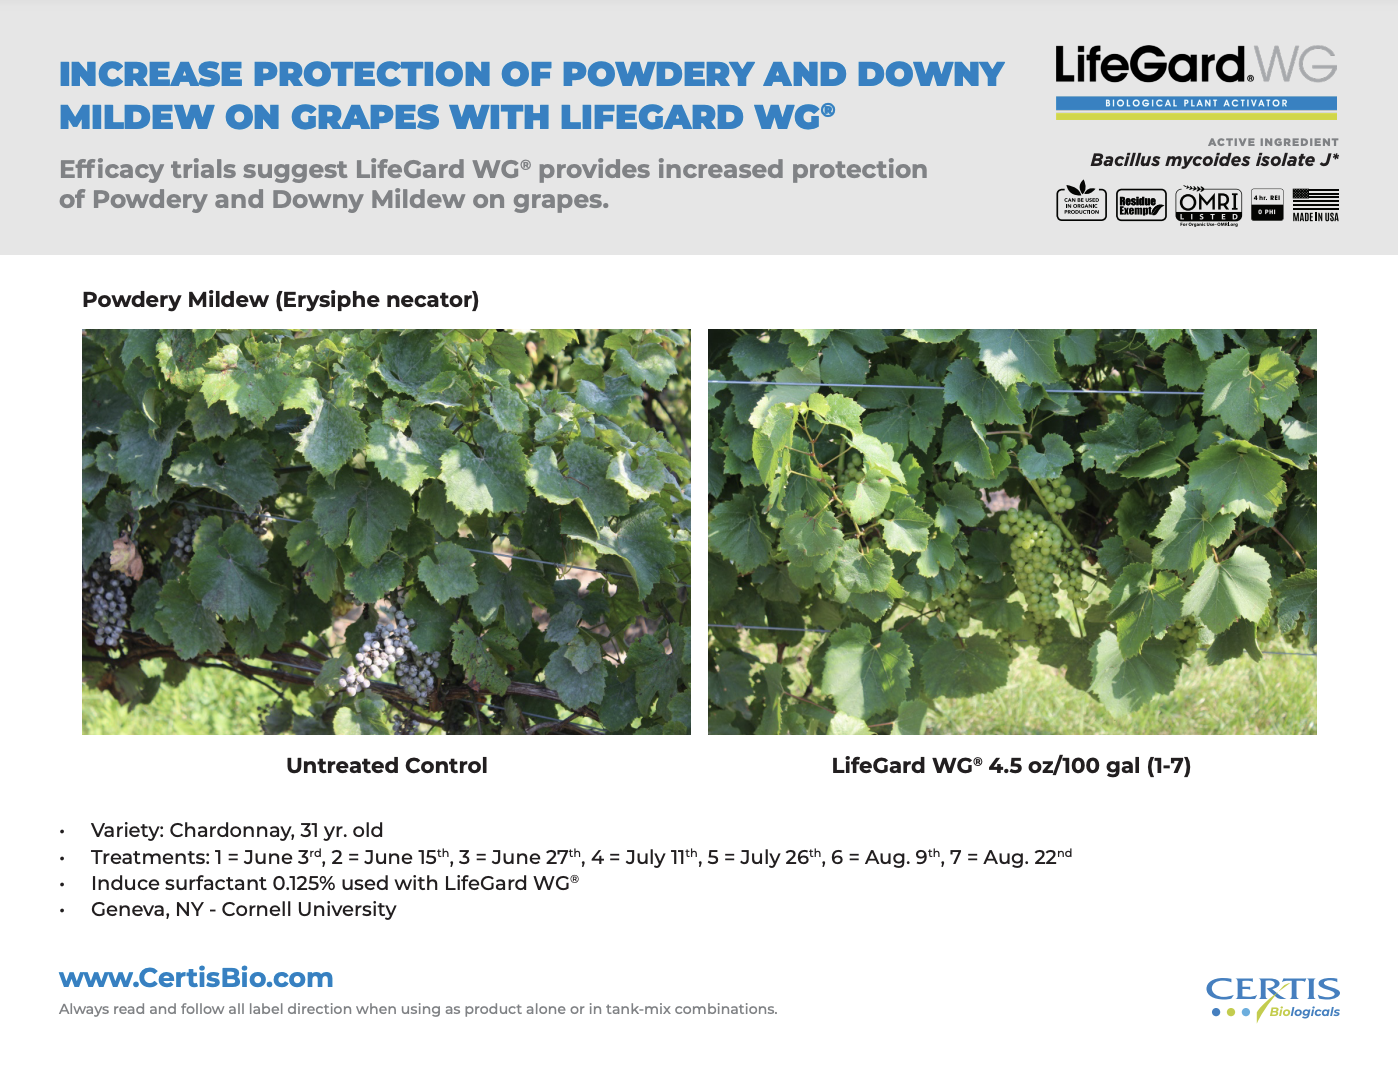 Powdery and Downy Mildew on Grapes Trail Data